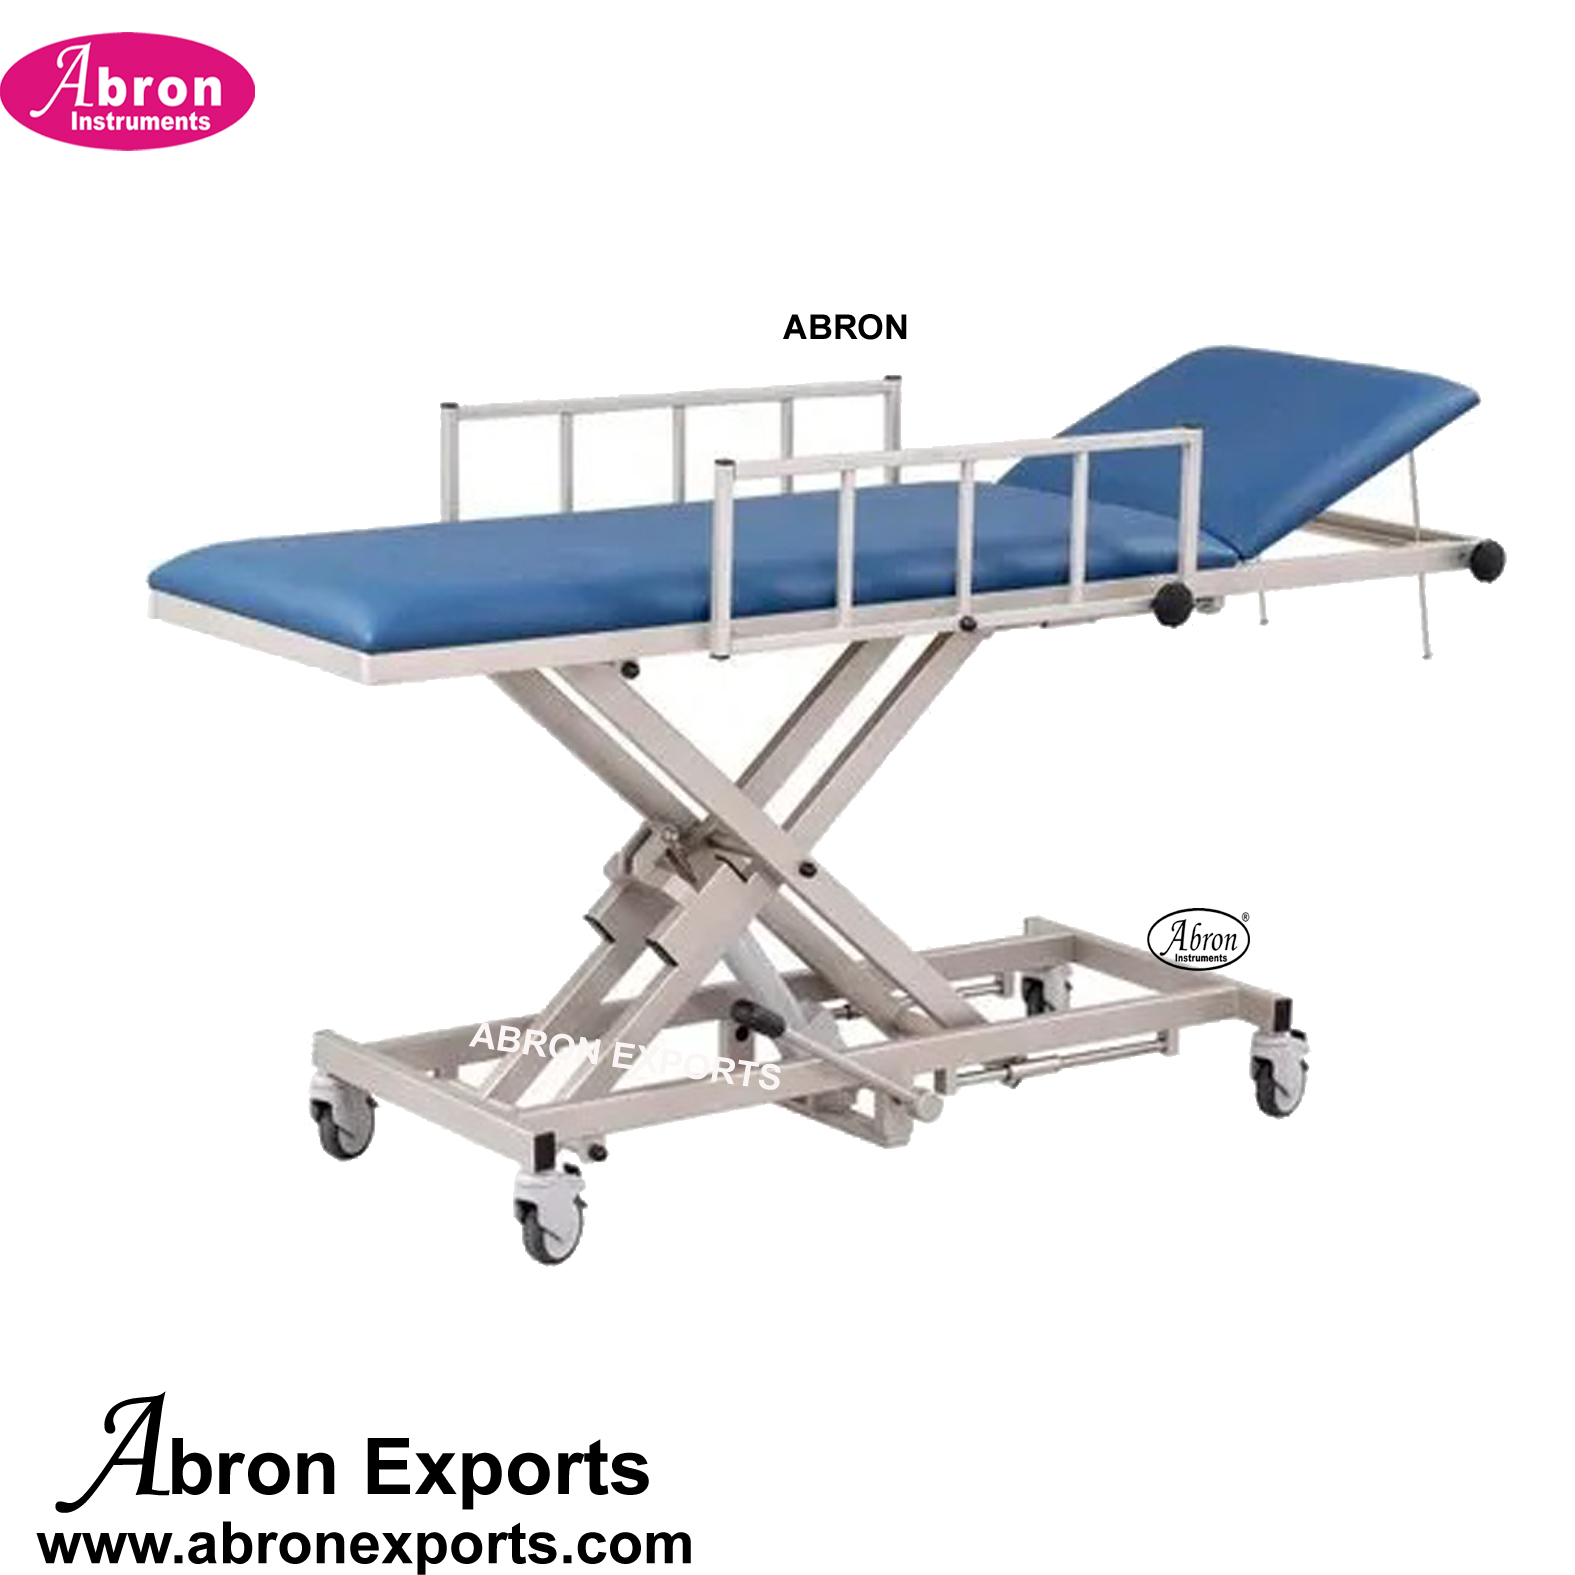 MRI  compatible stretcher 190x60x90cm with wheels mattres ainlinable Head Tfolding stretcher trolley Abron ABM-2721ST 